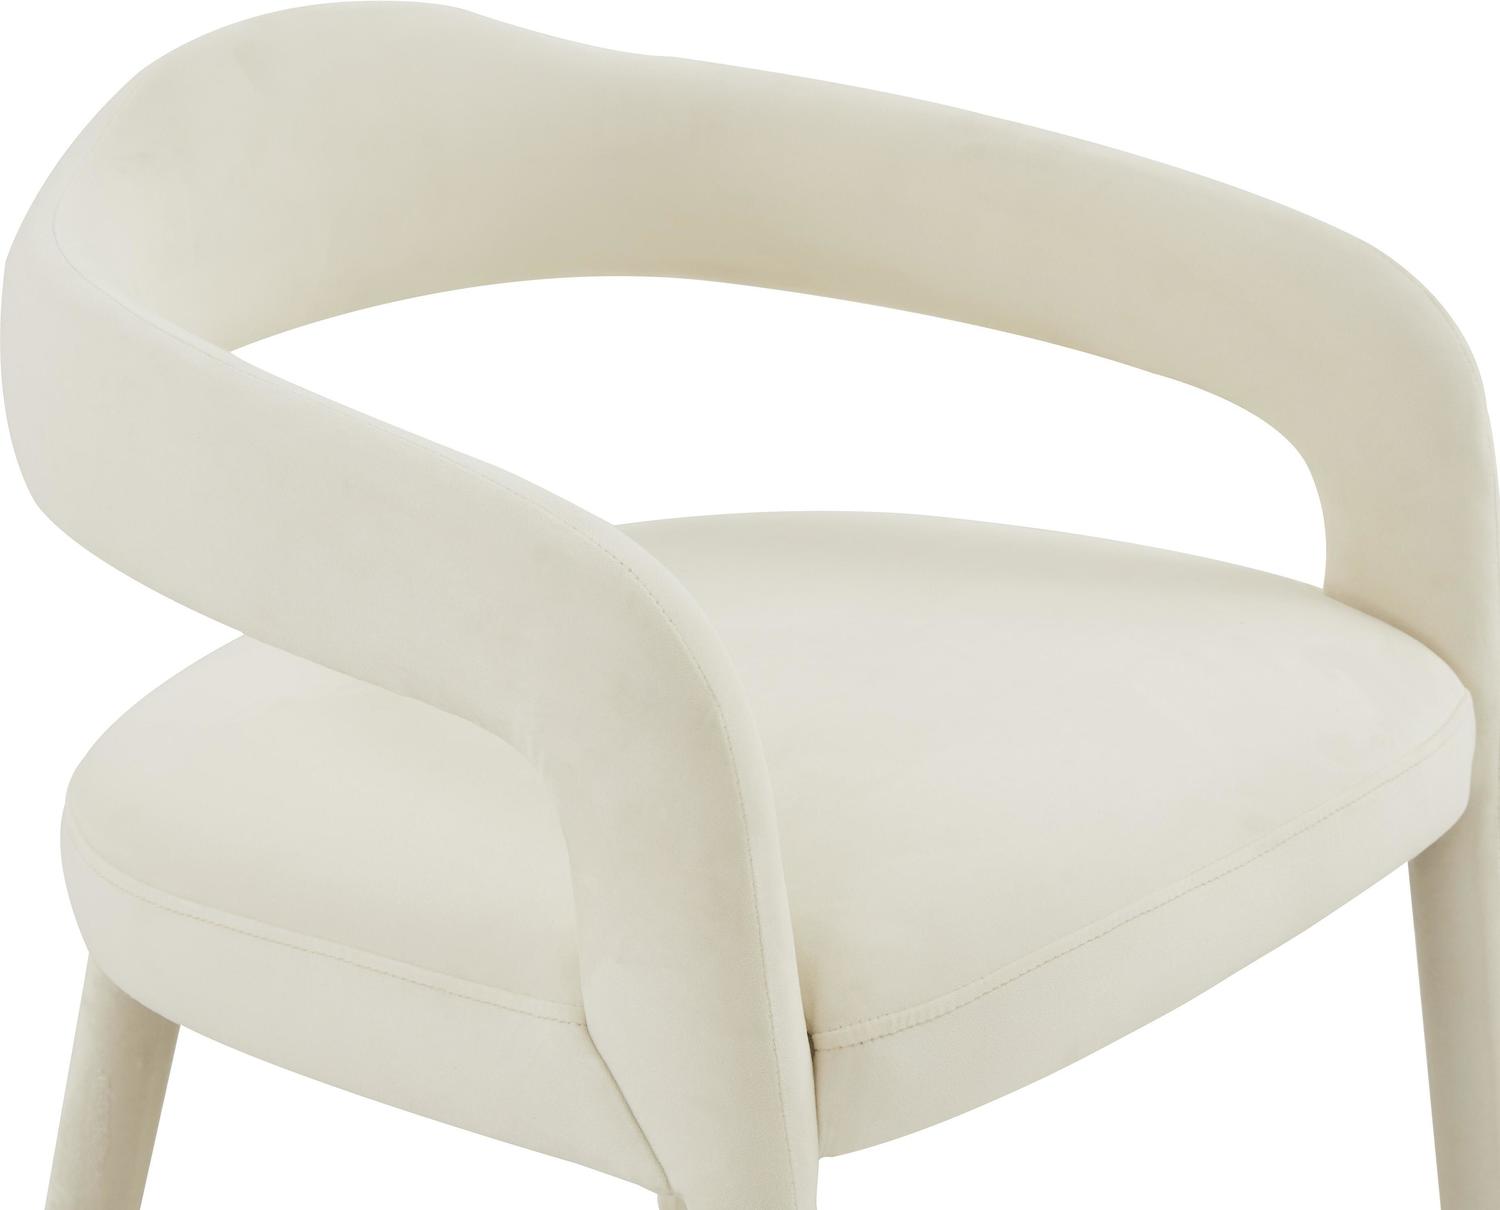 contemporary dining room sets Contemporary Design Furniture Dining Chairs Cream